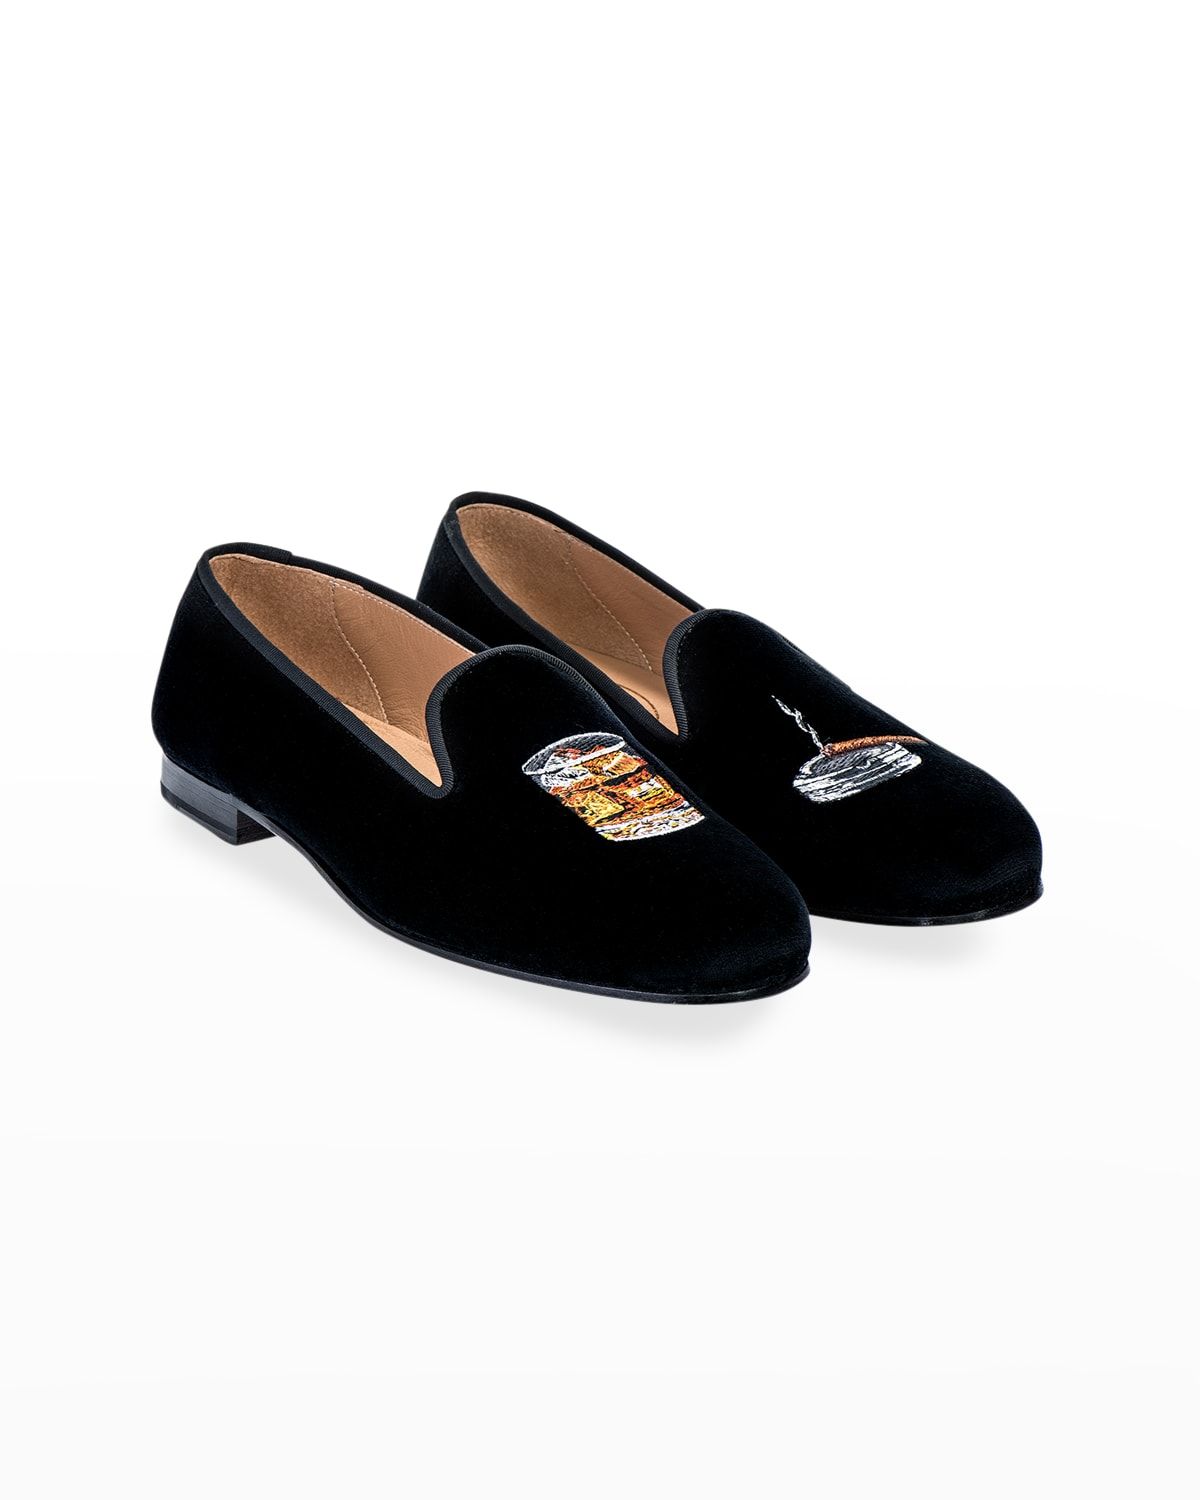 Men's Scotch Embroidered Velvet Loafers | Neiman Marcus